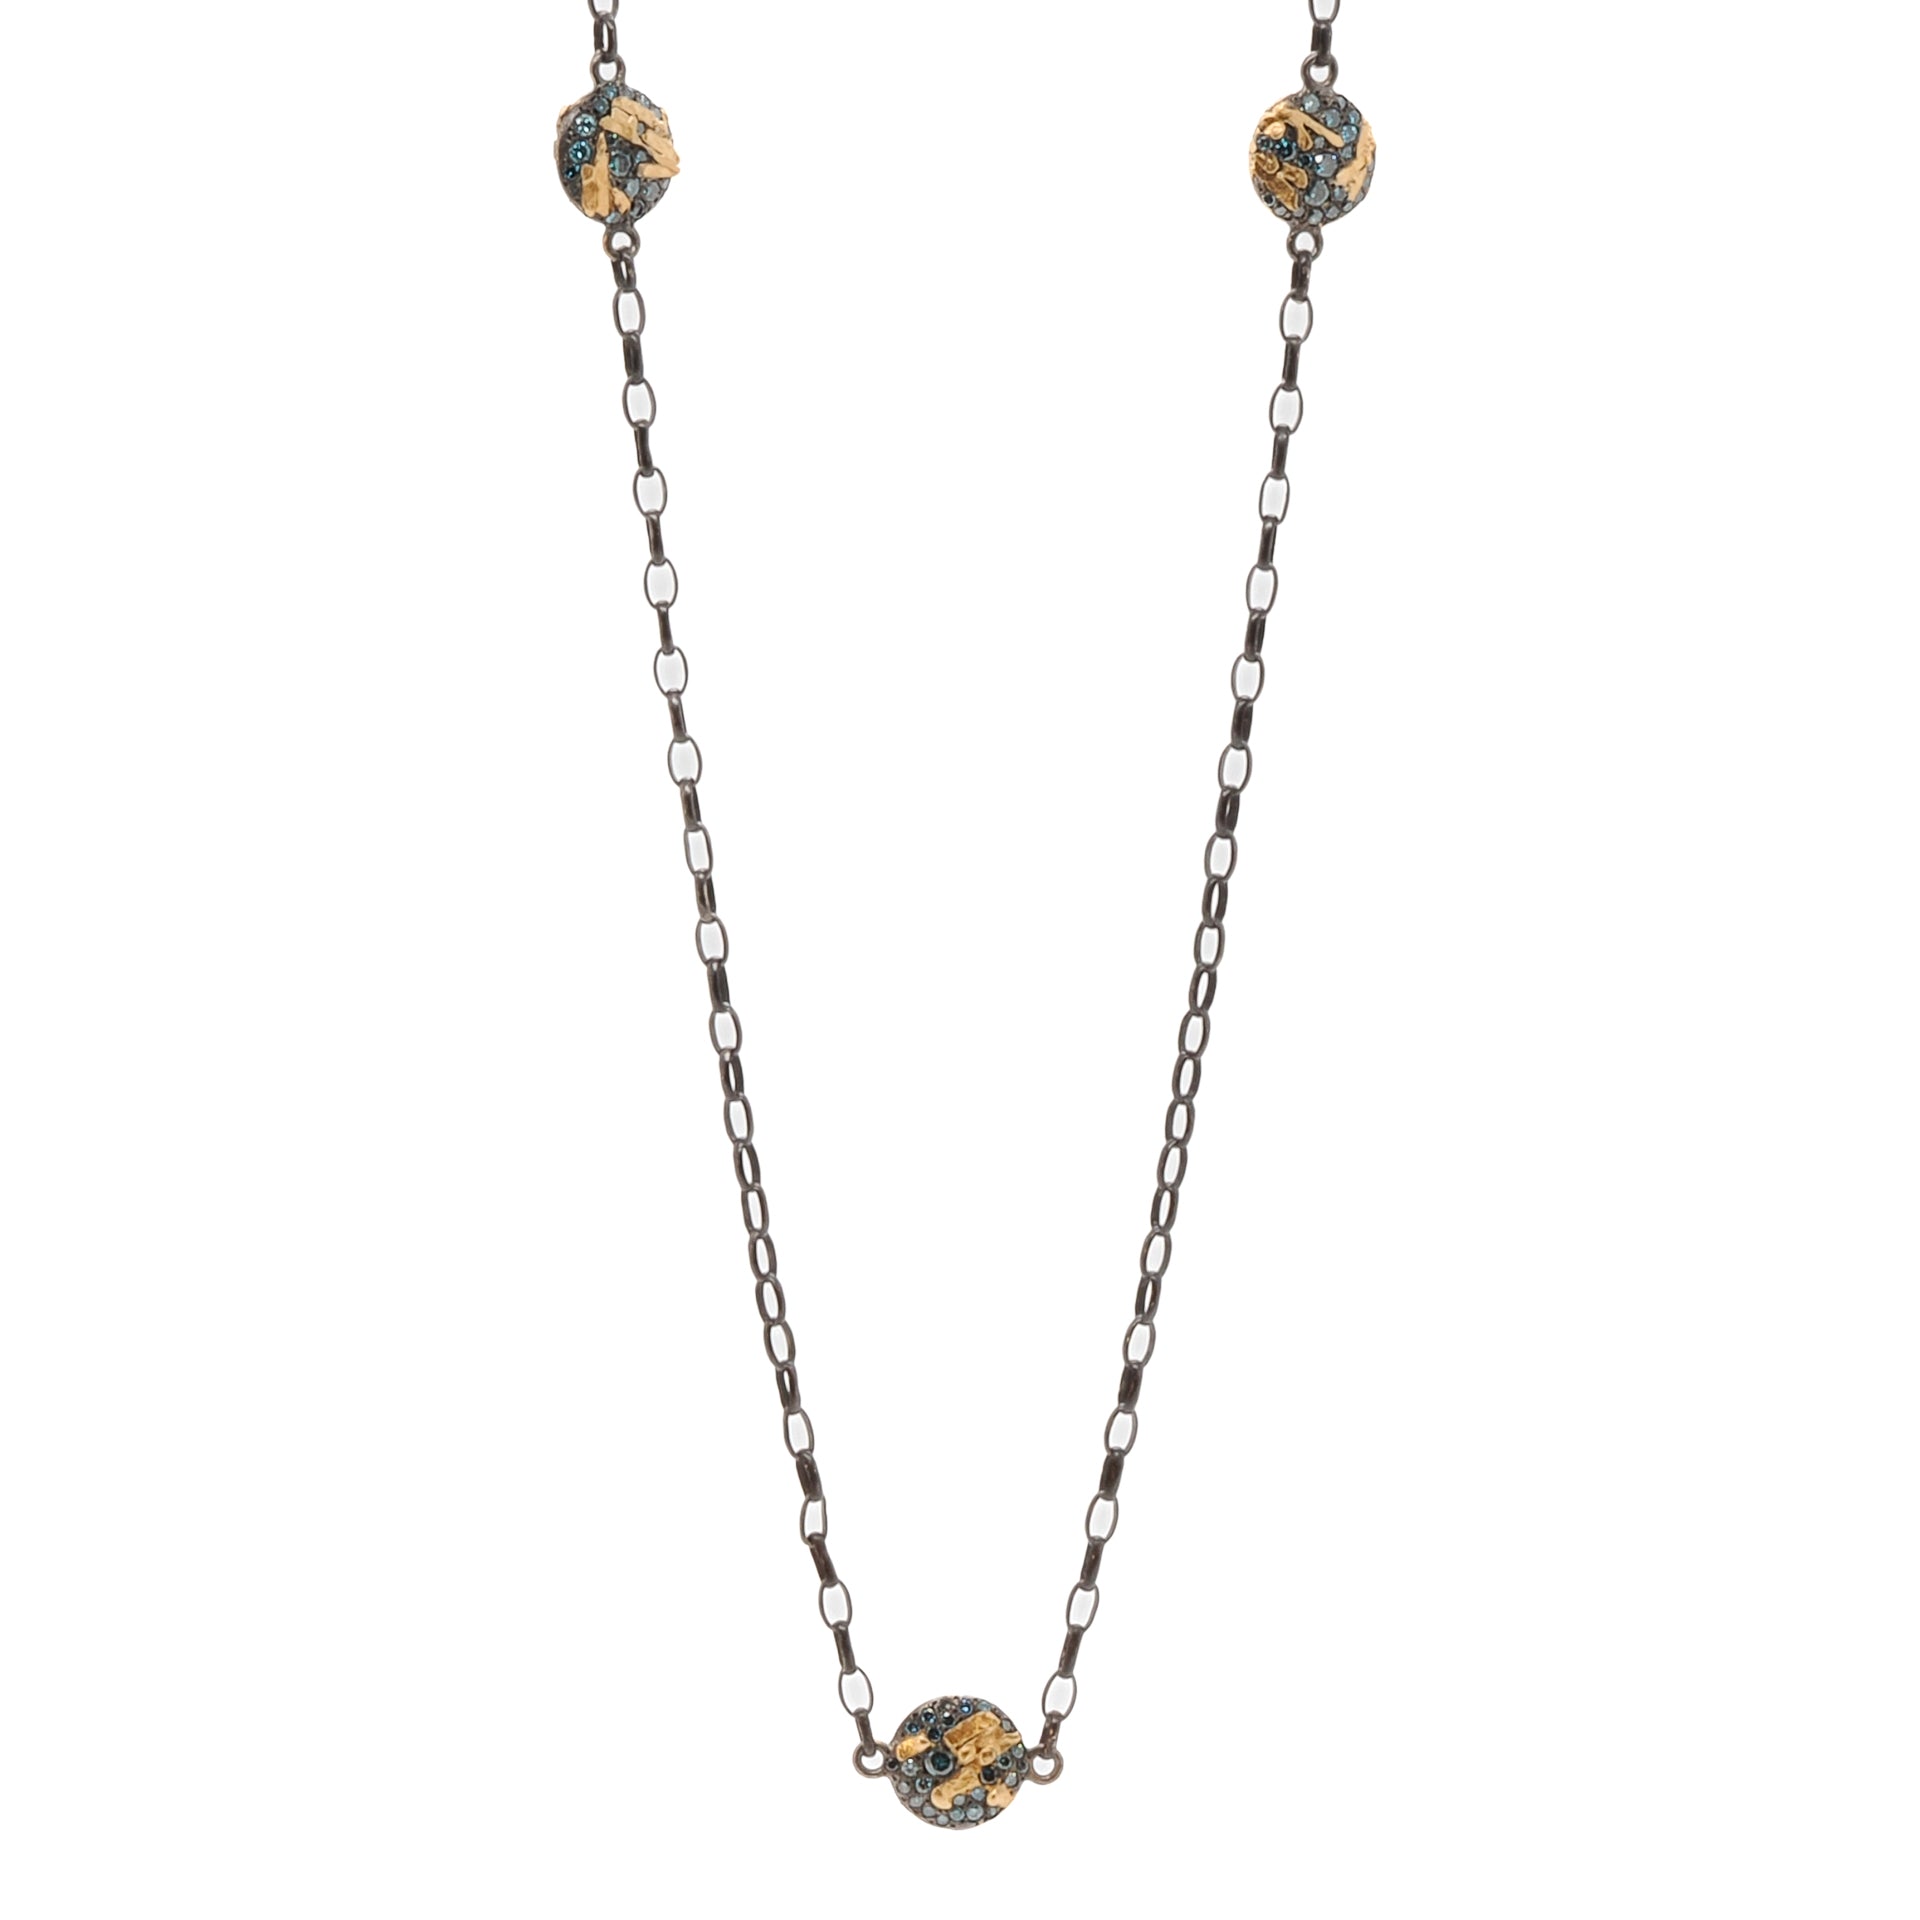 Nature Round Link Necklace, a statement piece that adds a touch of sophistication and luxury to any ensemble.